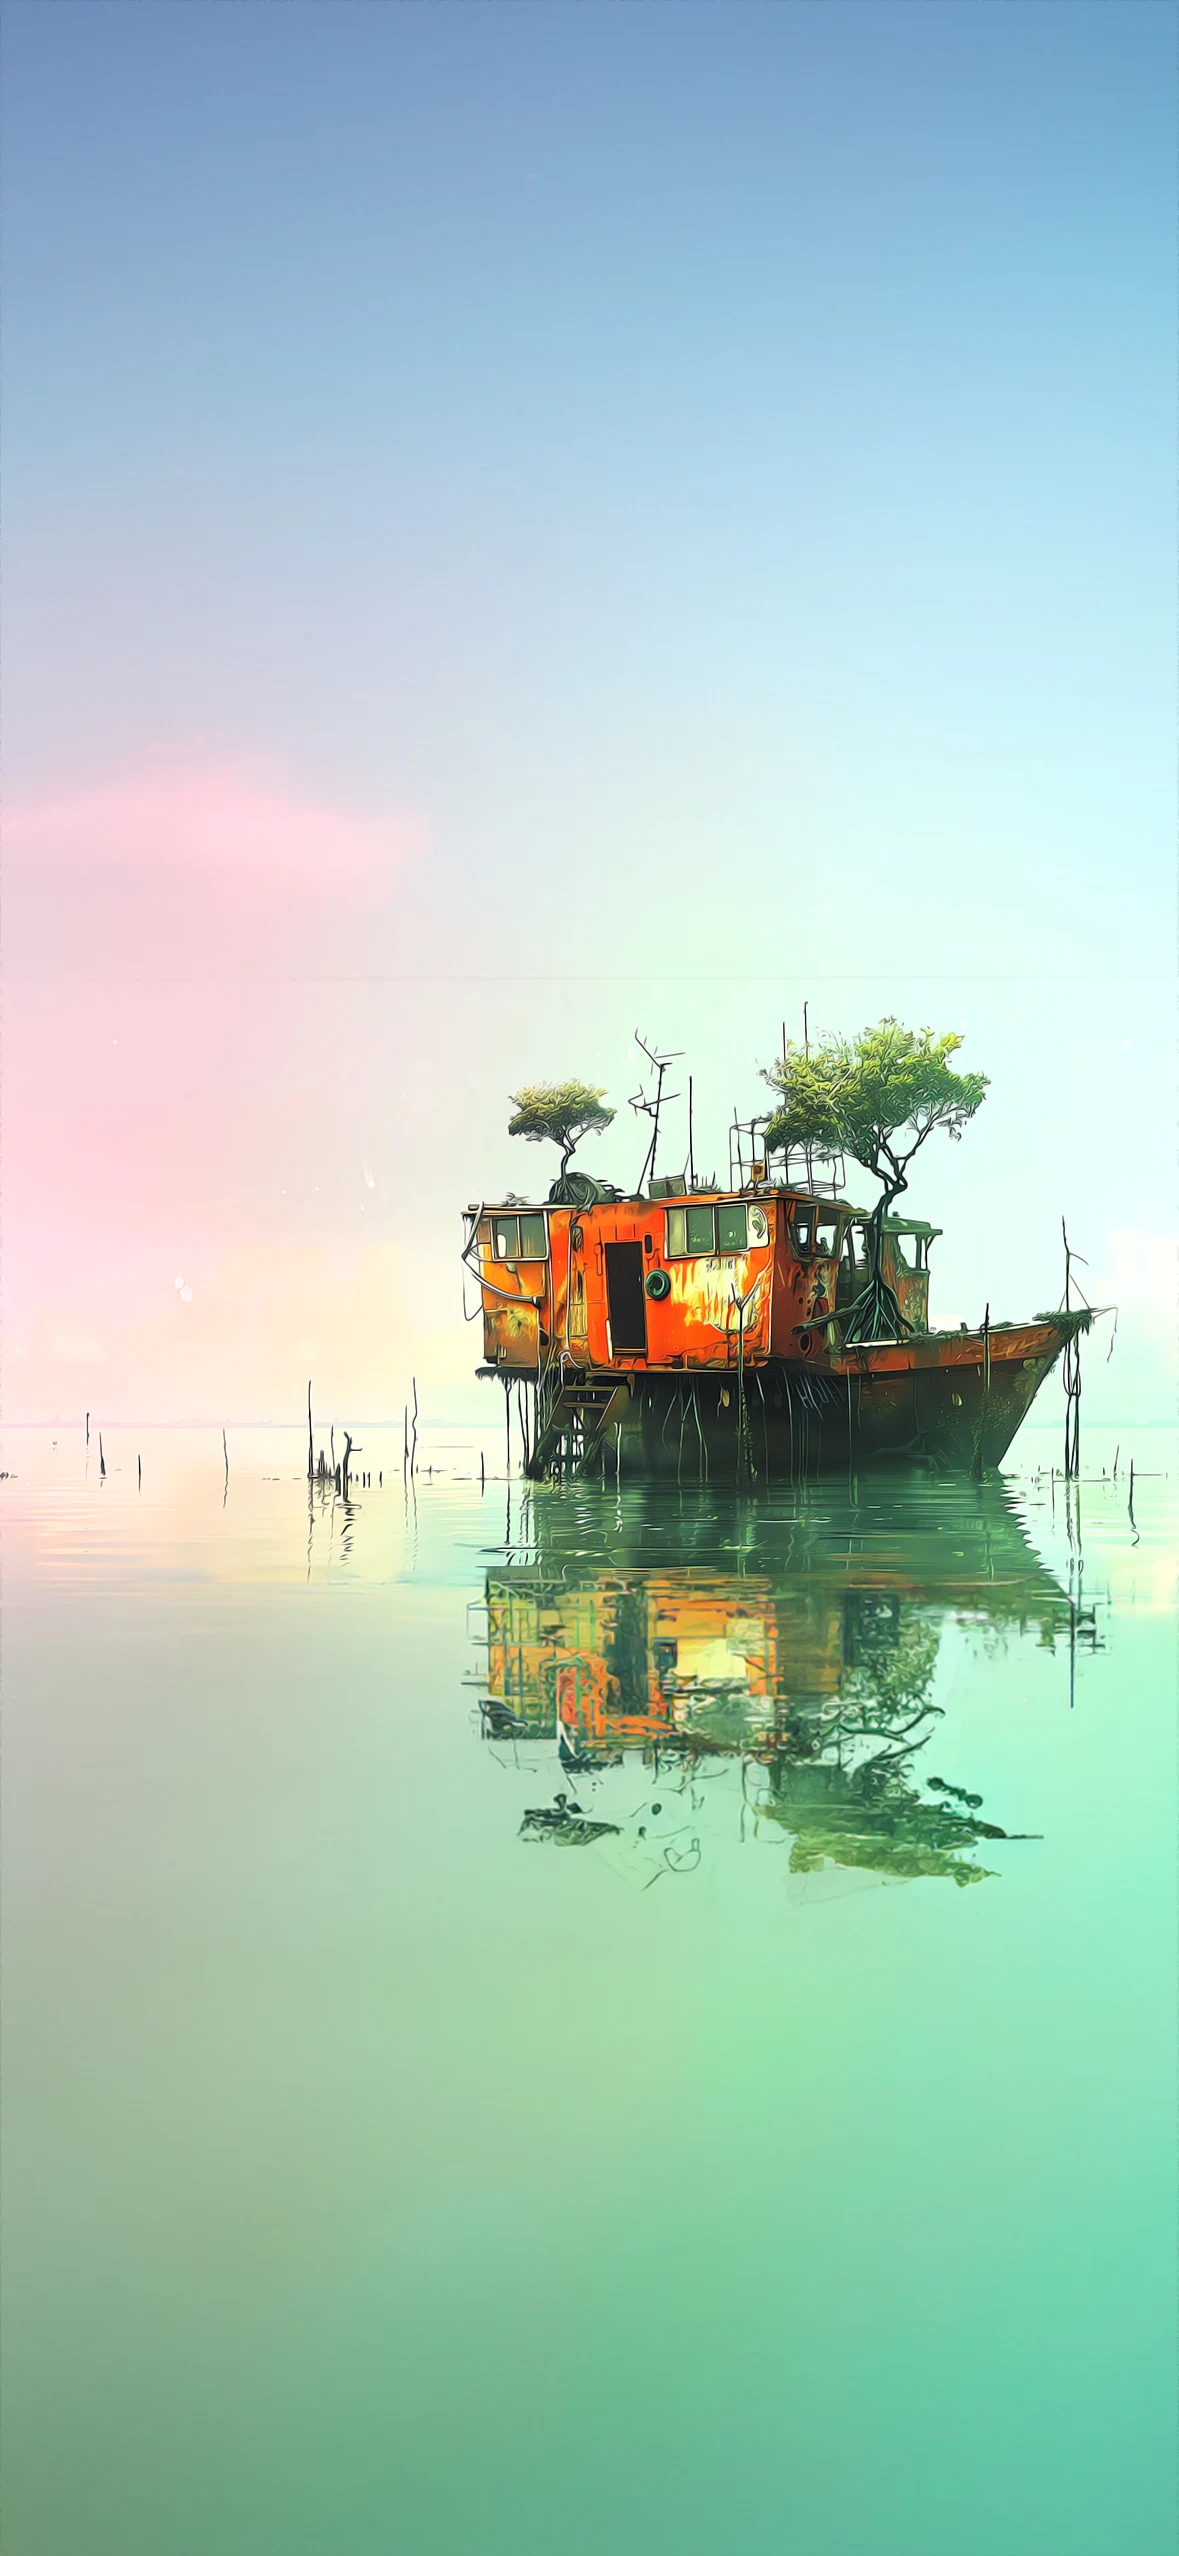 iphone wallpaper of Stylized illustration of an old, rusted orange boat with overgrown trees on deck, floating in calm water under a soft pastel sky.